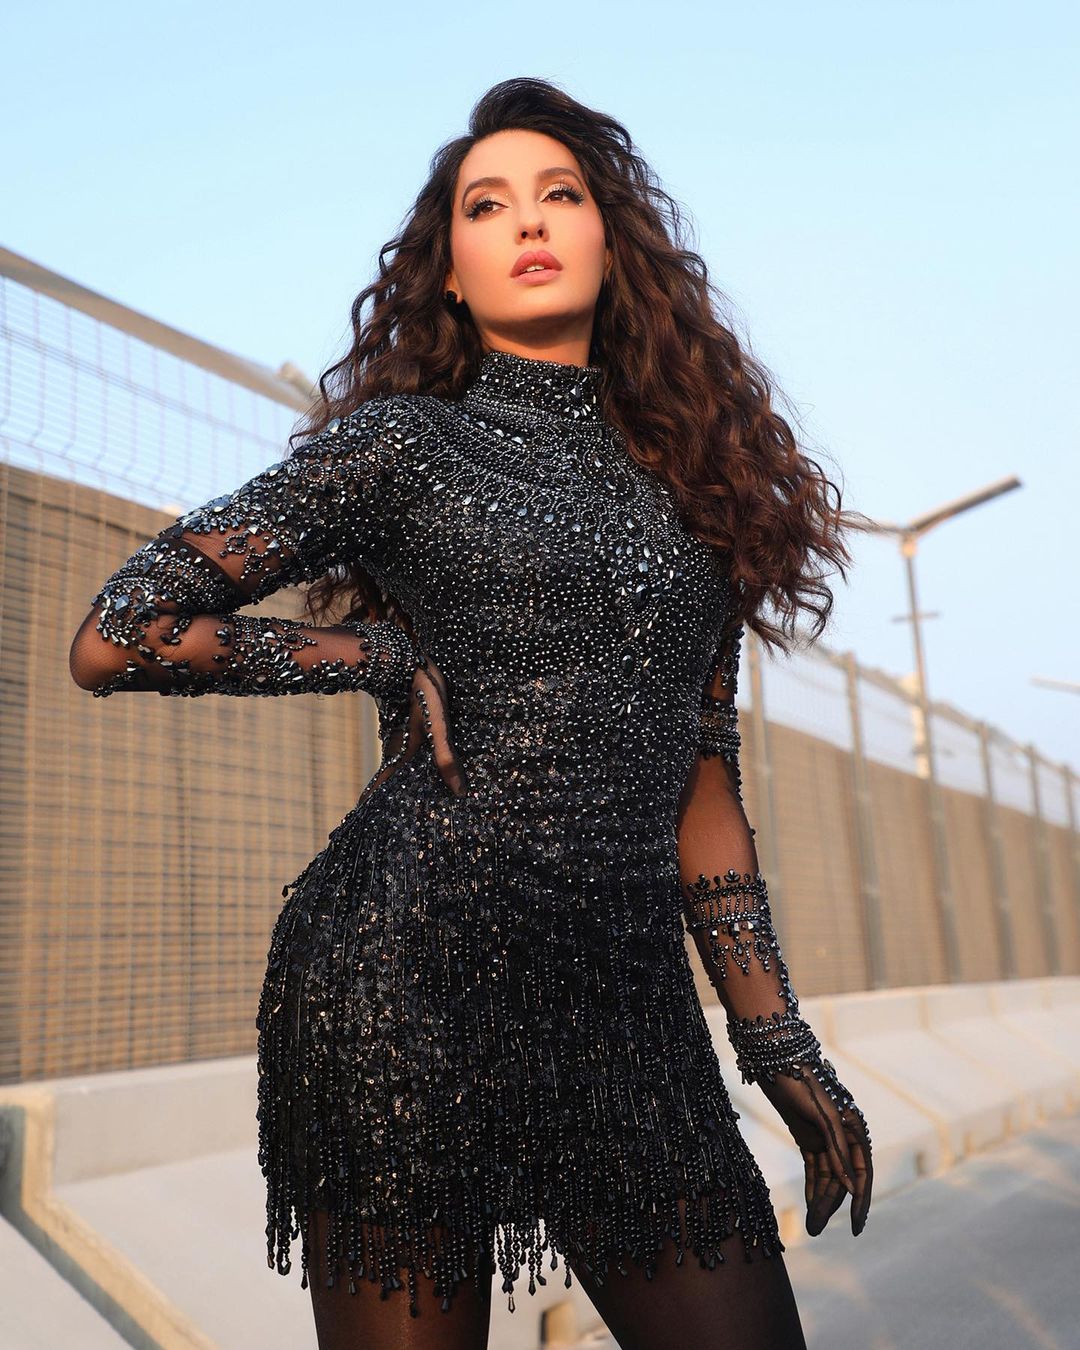 Nora Fatehi dazzled in a sparkly black outfit for her World Cup performance. 